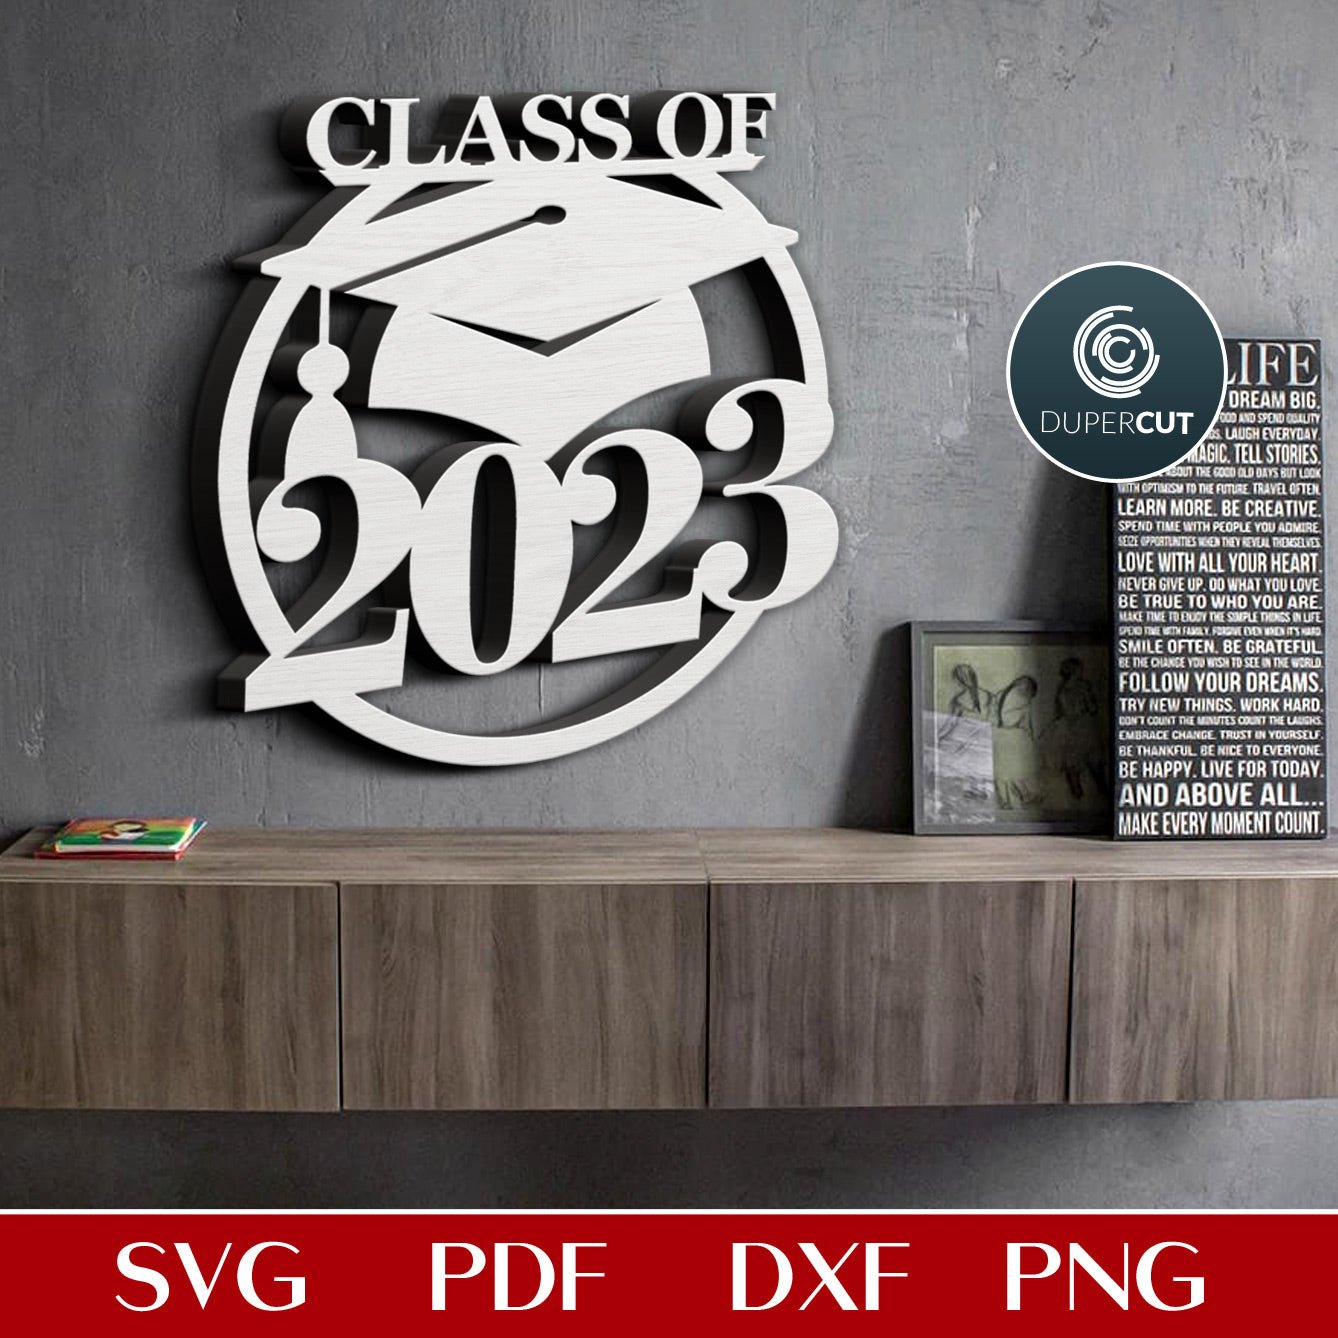 Graduation sign class of 2023 wall decor - SVG DXF vector laser cutting files for Glowforge, Cricut, Silhouette. CNC plasma and scroll saw pattern by DuperCut.com